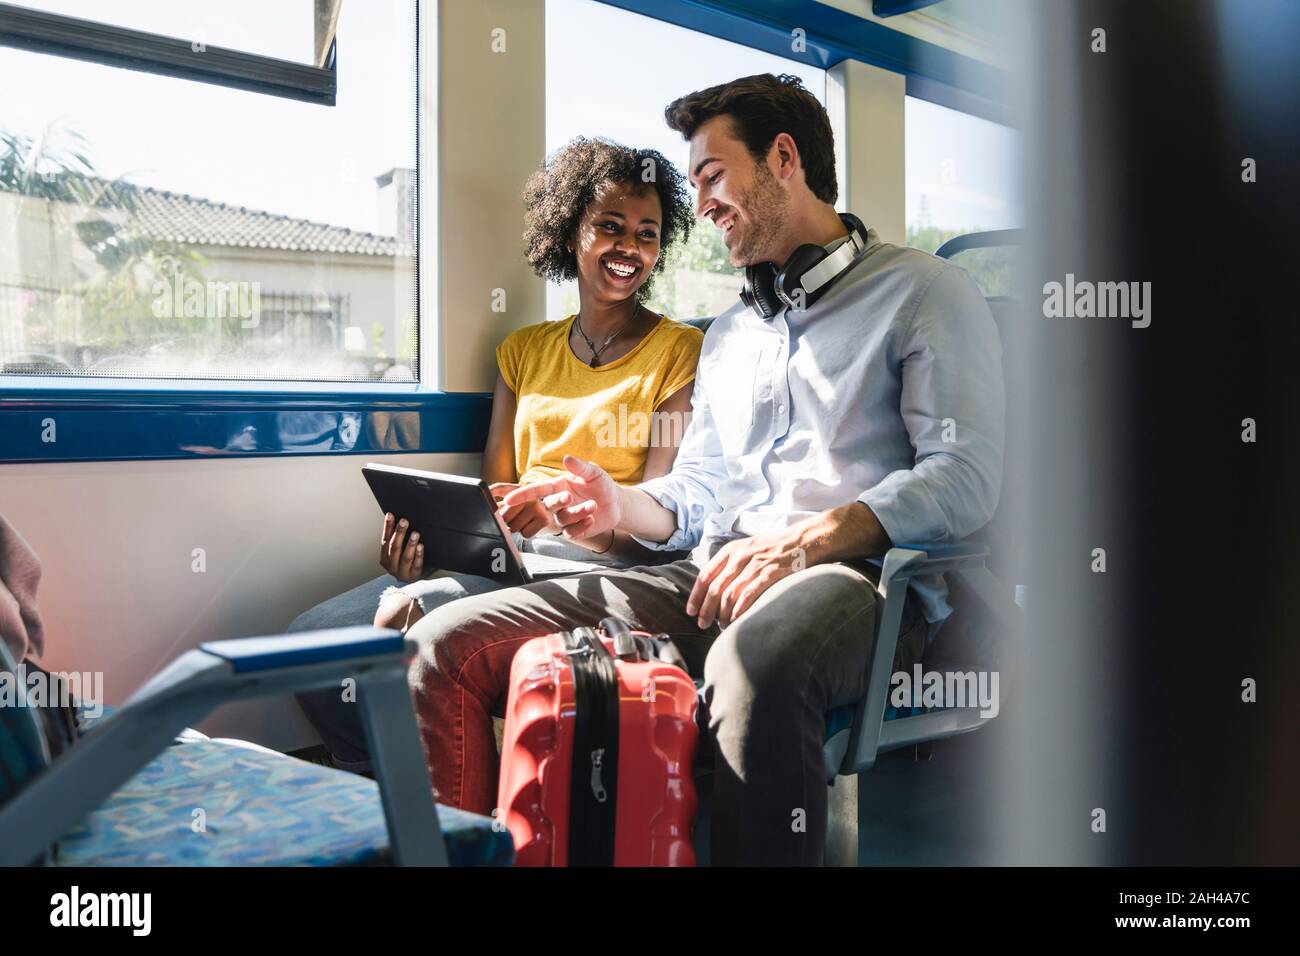 Happy young couple using tablet in a train Stock Photo